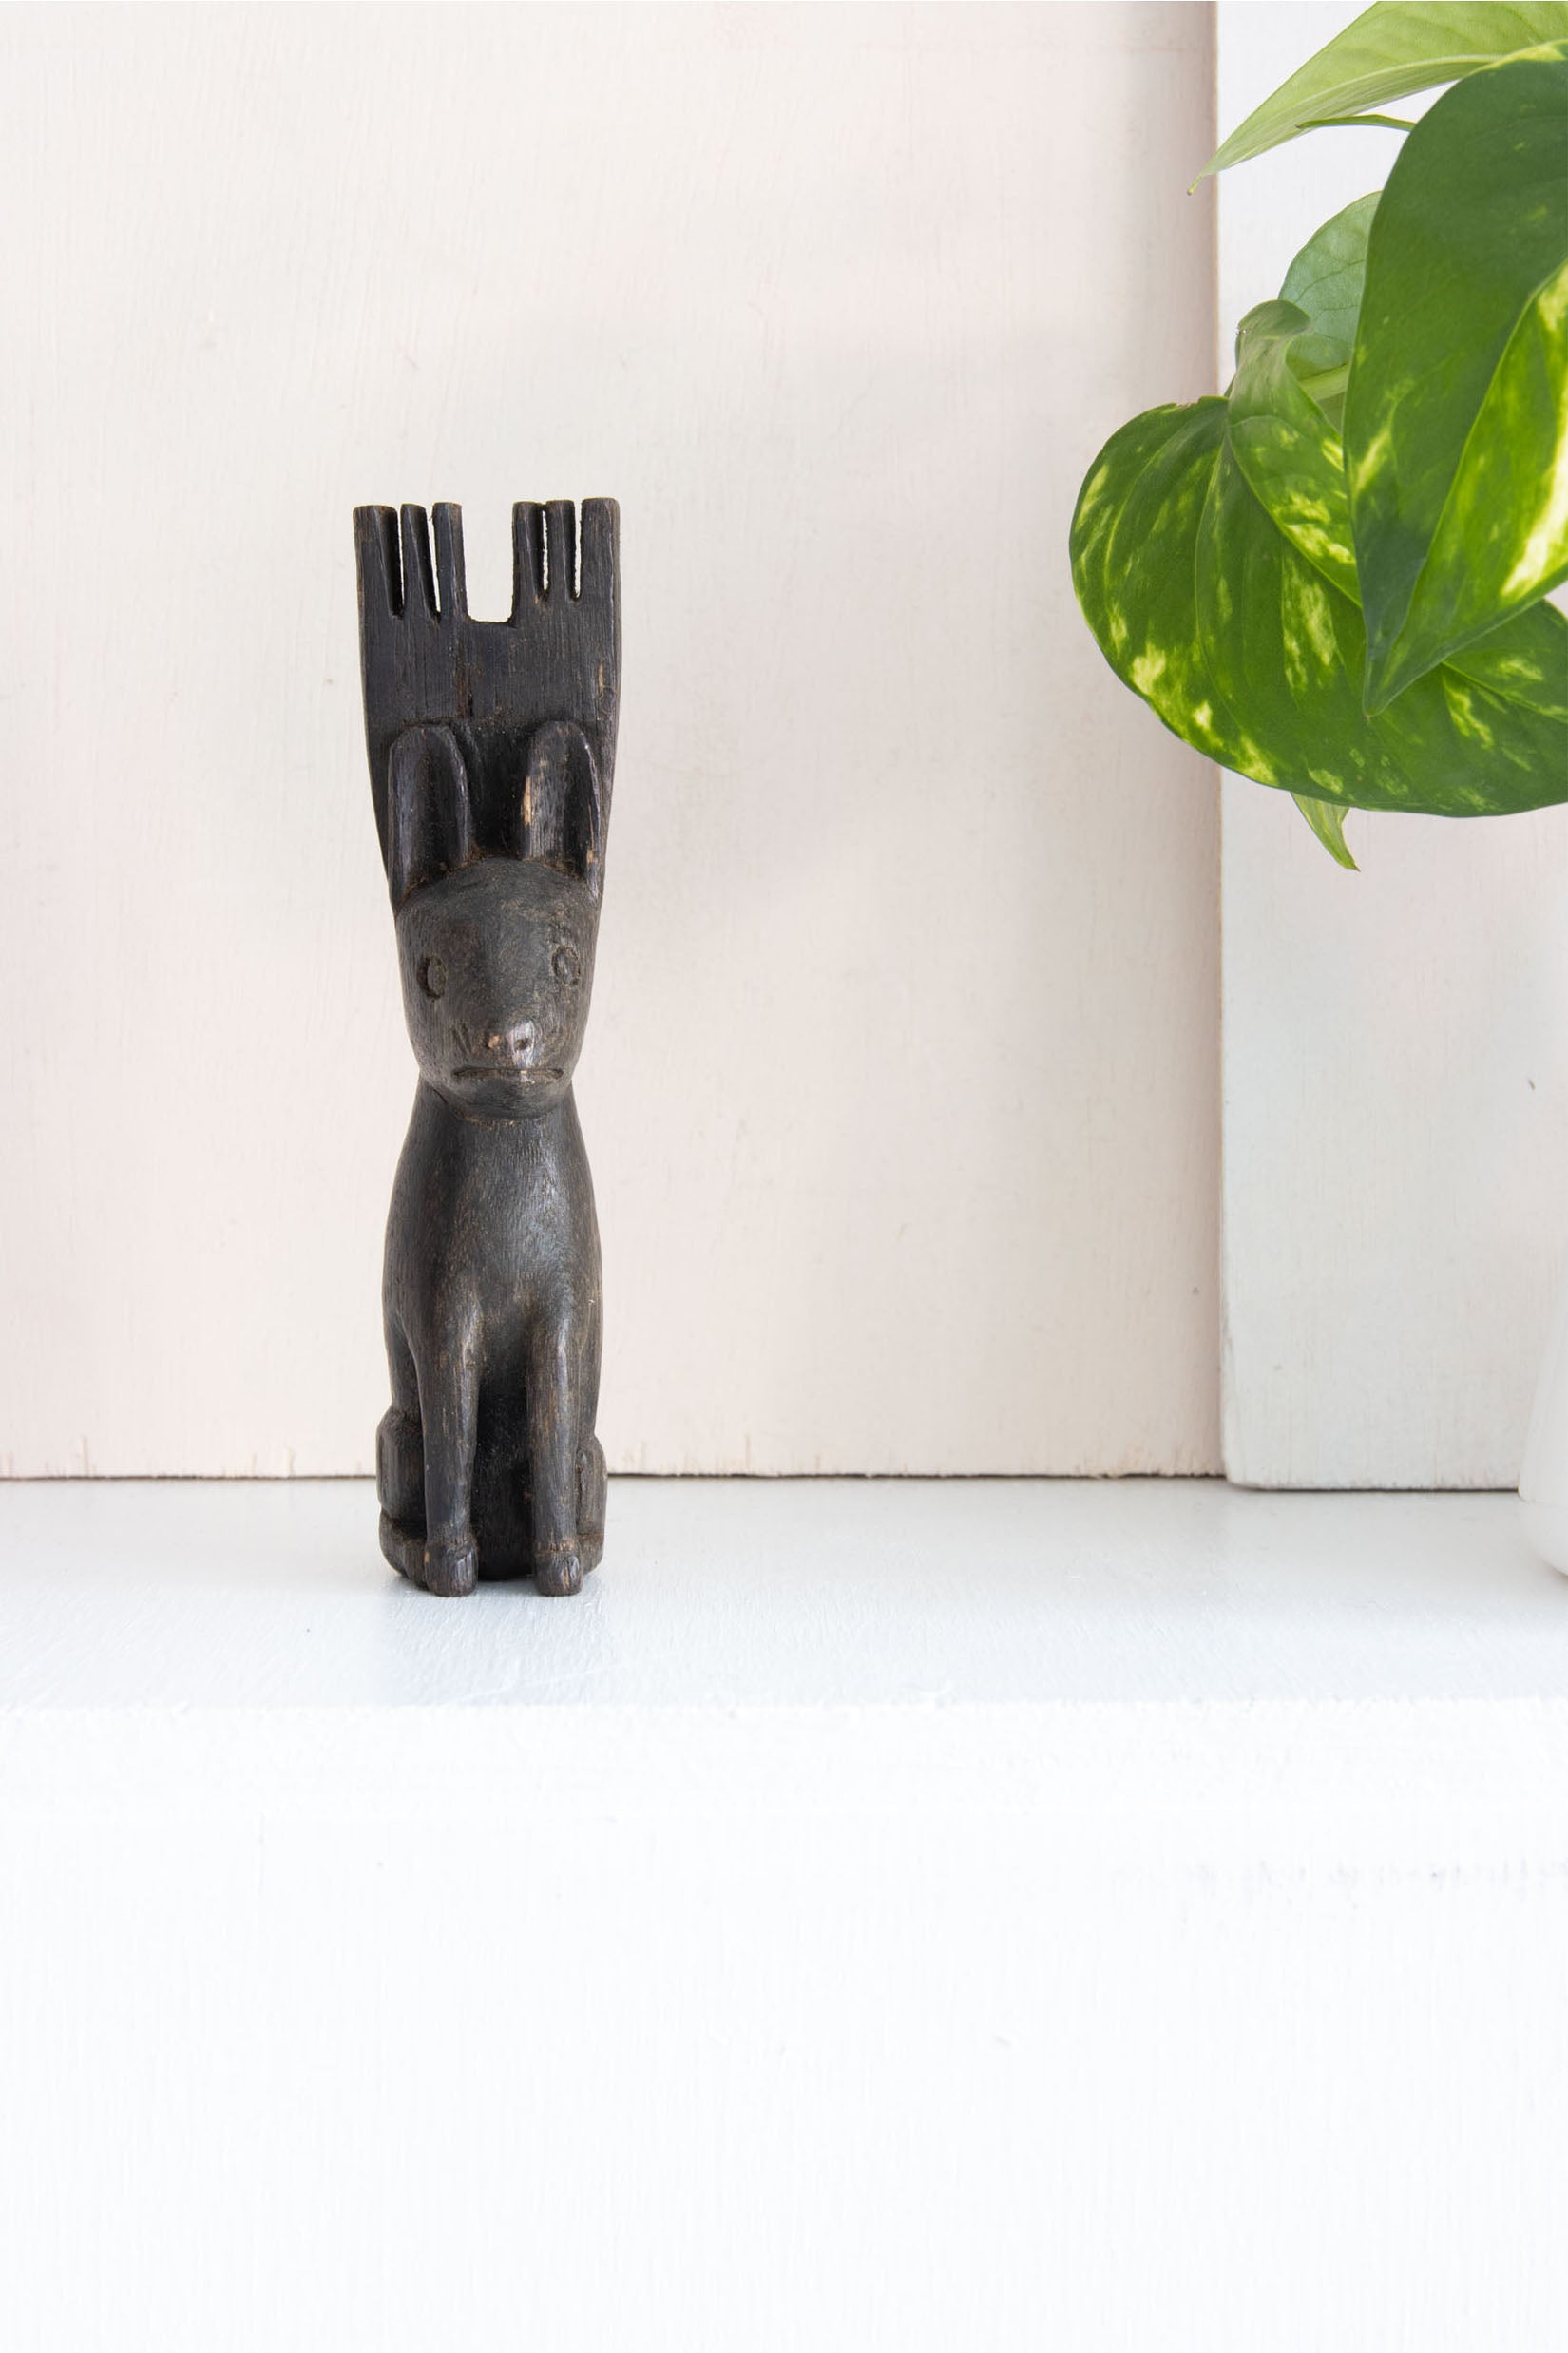 Hand-carved Wooden Figurine No. 15